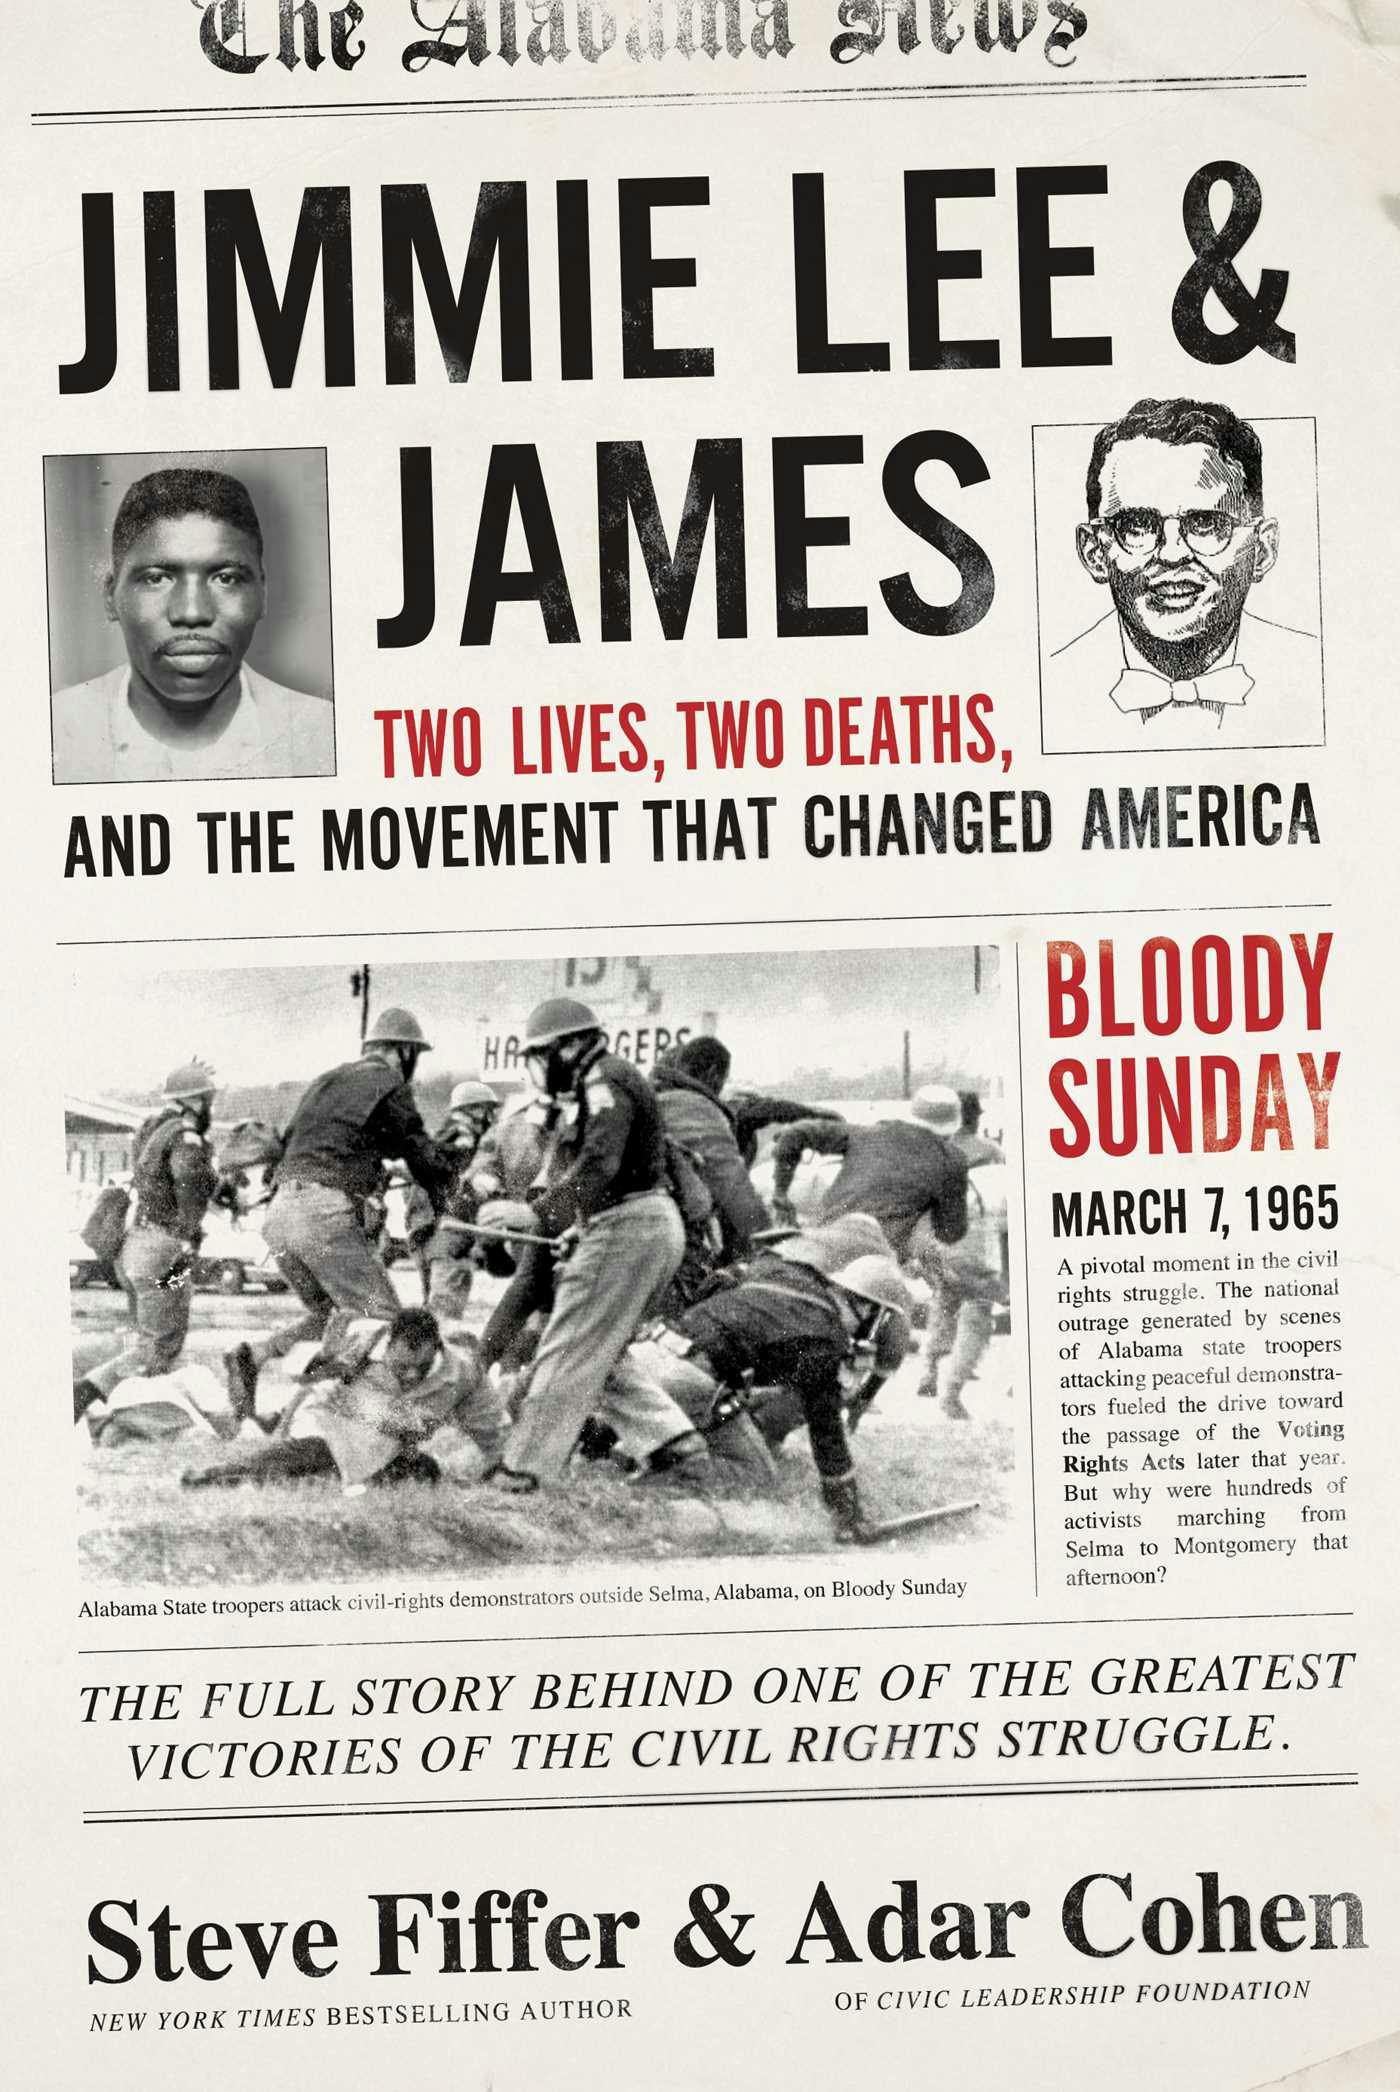 Jimmie Lee & James: Two Lives, Two Deaths, and the Movement that Changed America - Adar Cohen, Steve Fiffer